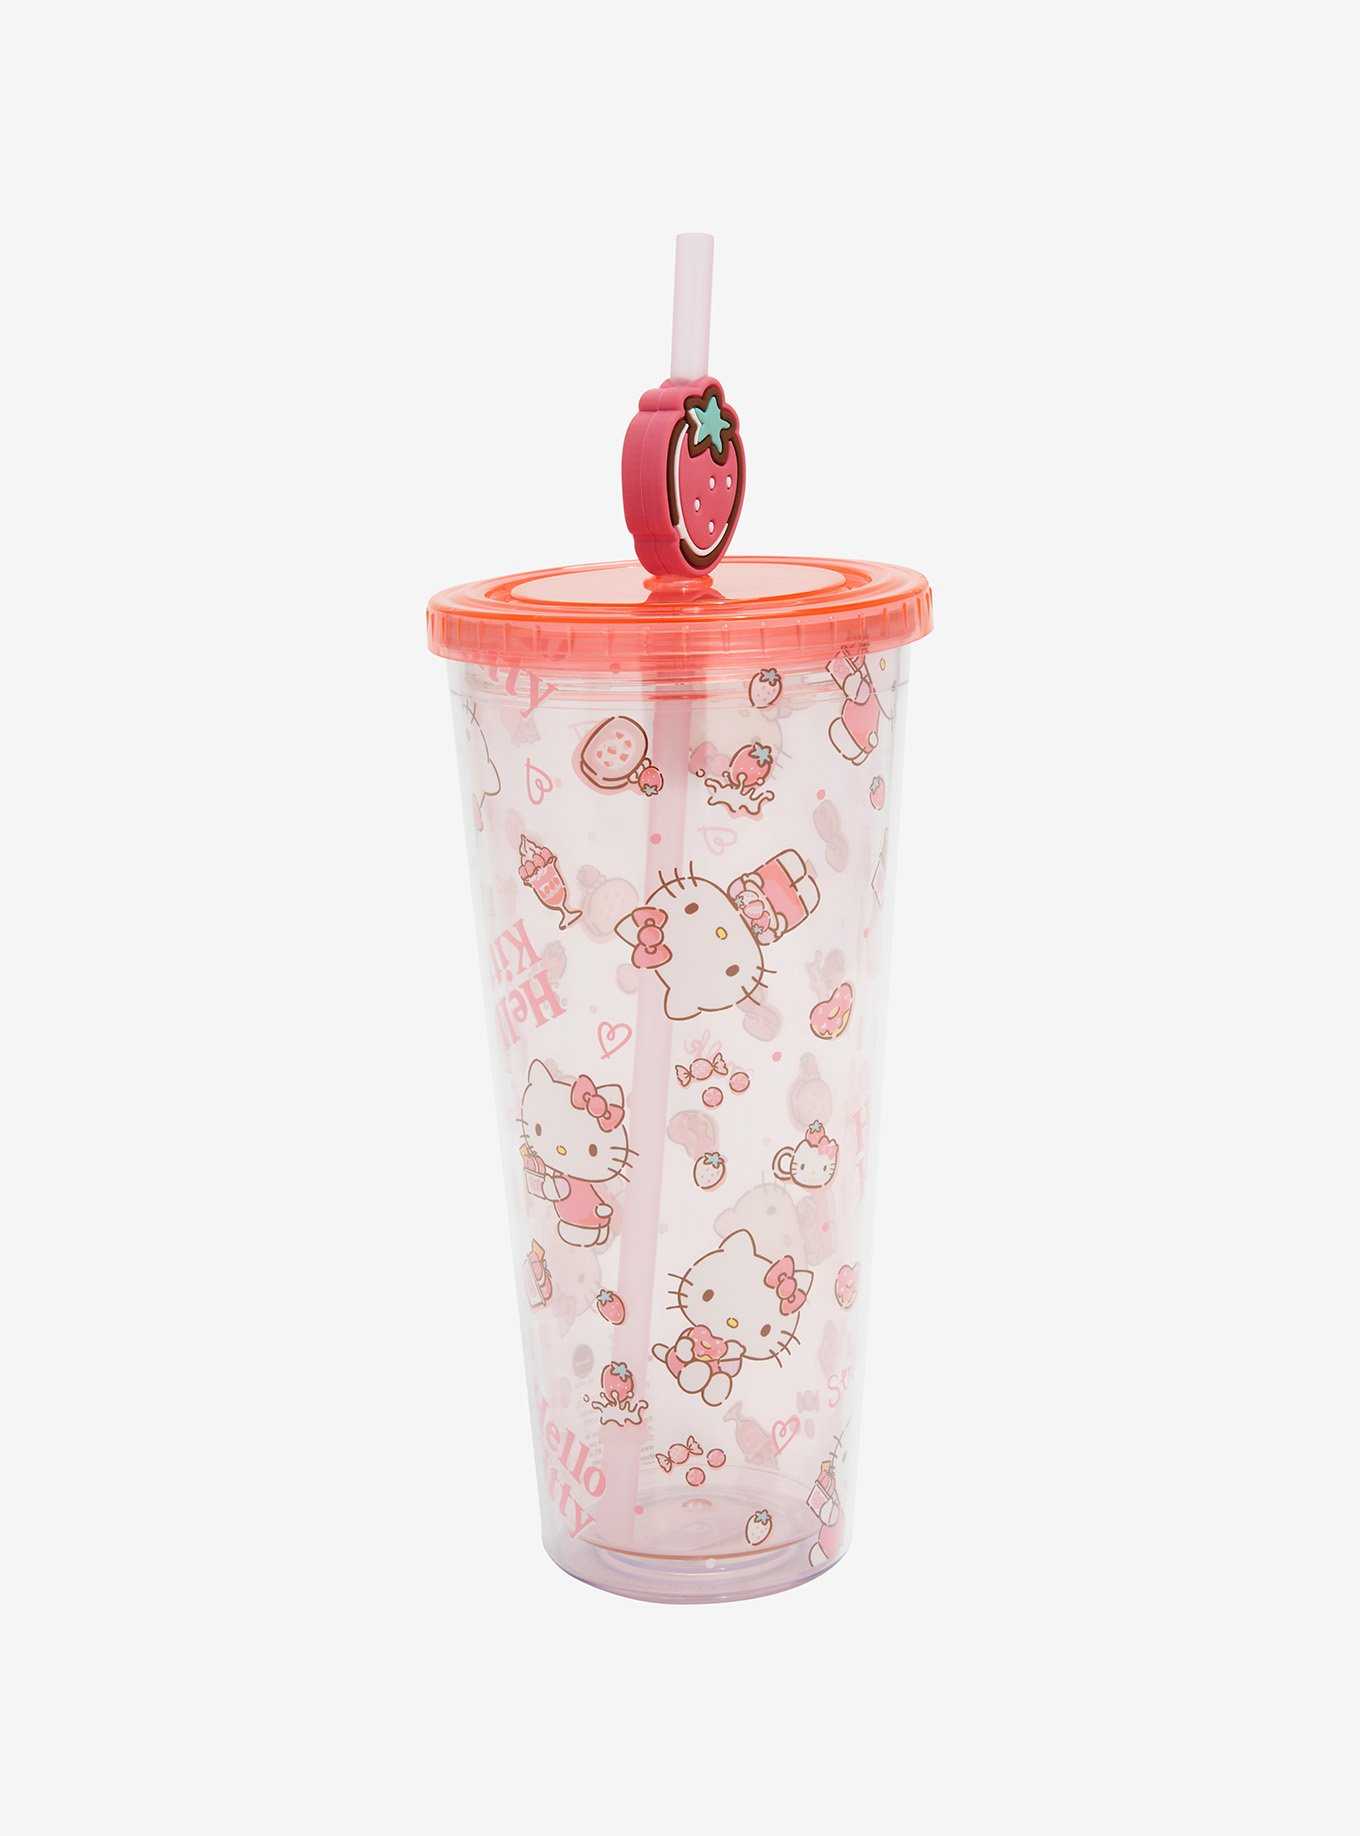 Sanrio Hello Kitty Strawberry Desserts Carnival Cup with Straw Charm, , hi-res